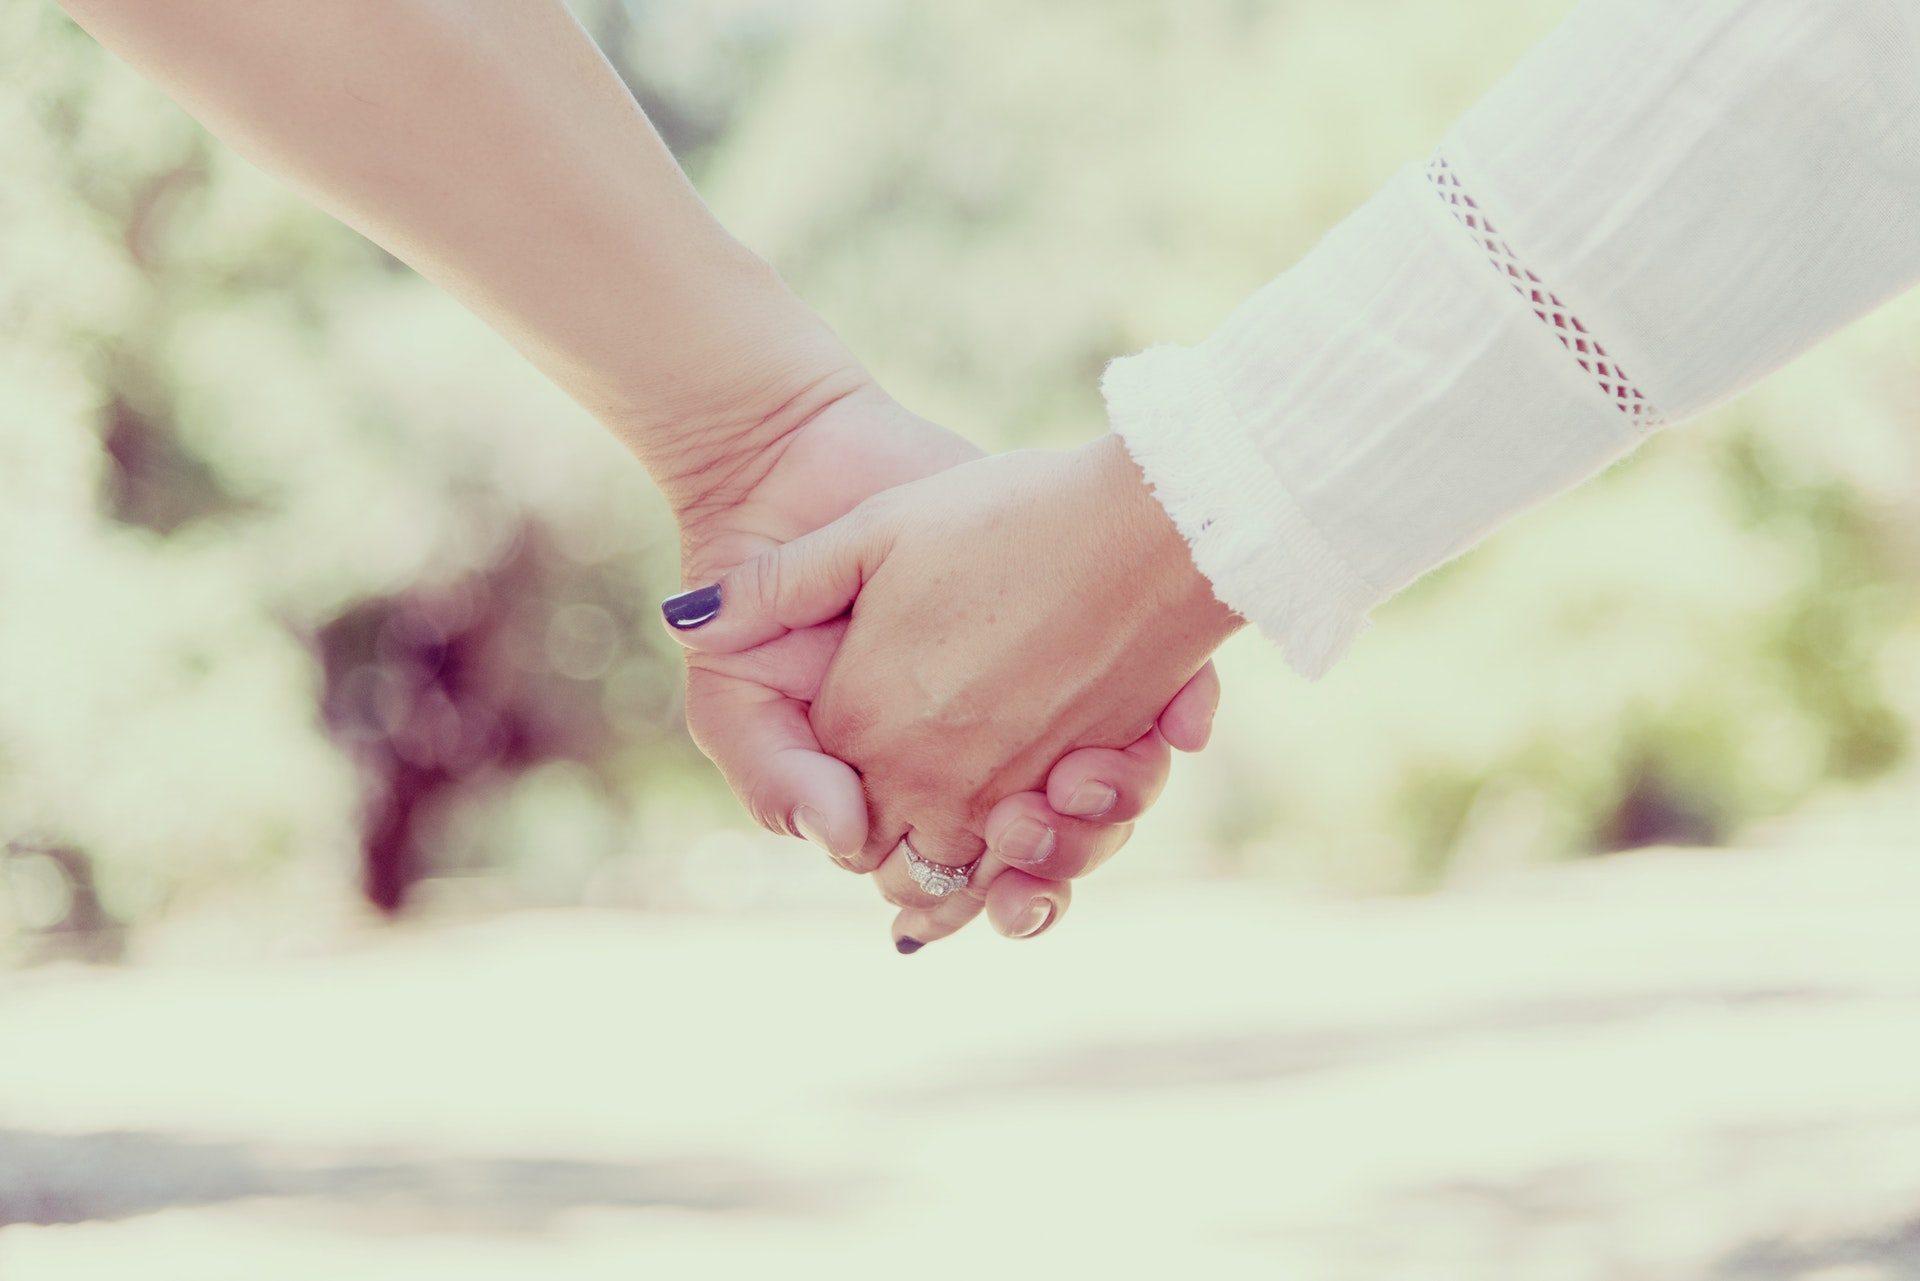 Lovers Holding Hands Image HD Download Free Wallpaper